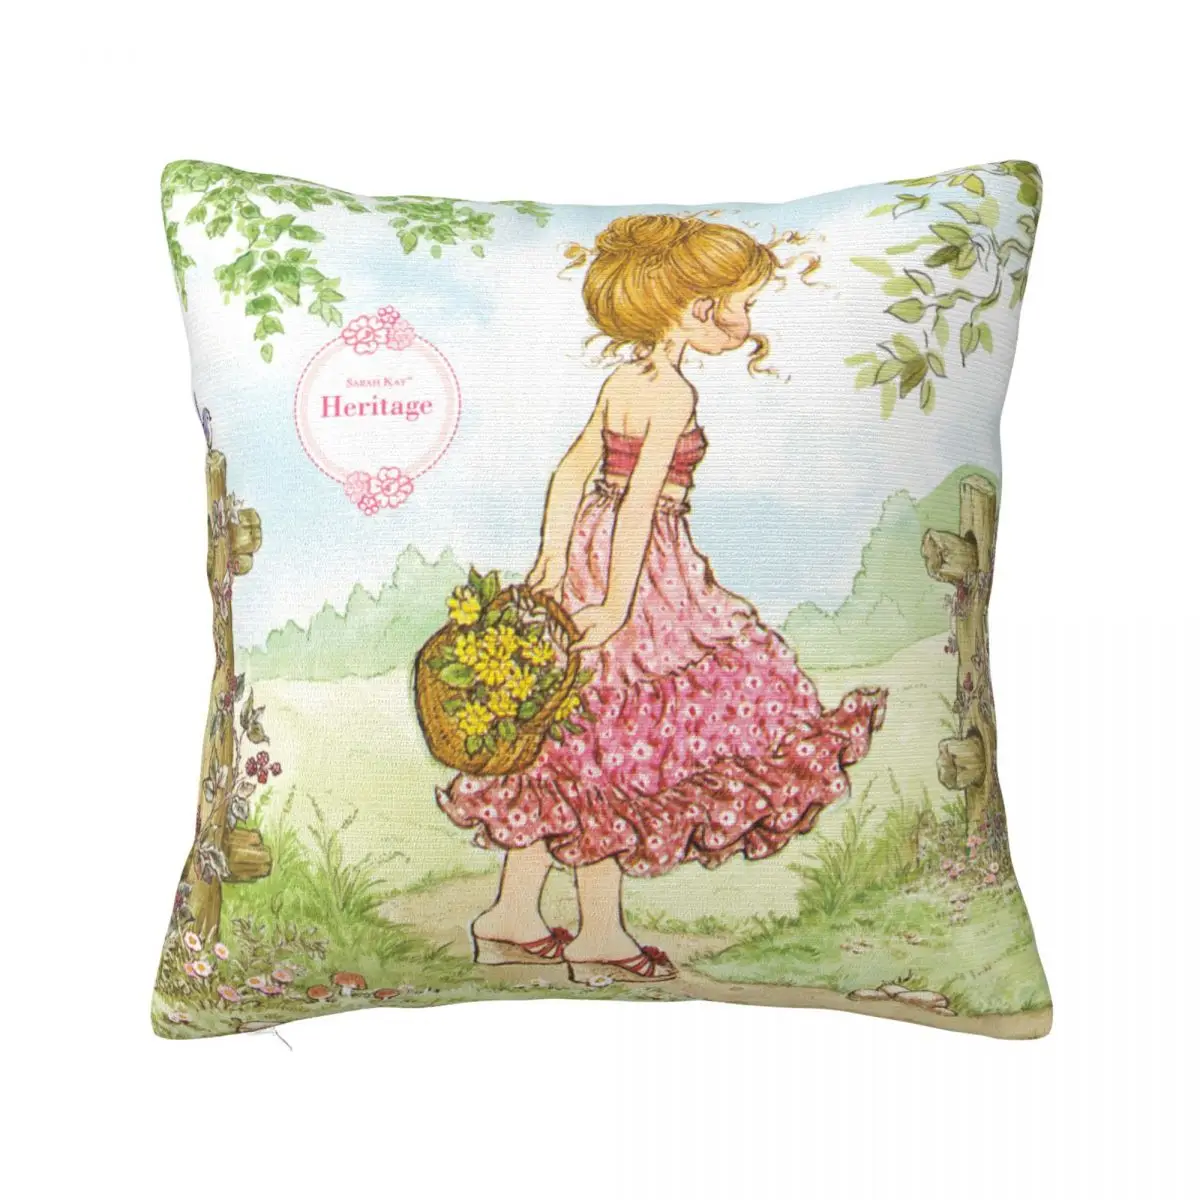 

Decorative Sarah Kay Accessories Pillow Covers Floral Flower Country Life Cartoon Girl Merch Throw Pillowcase Cover Multi-Size